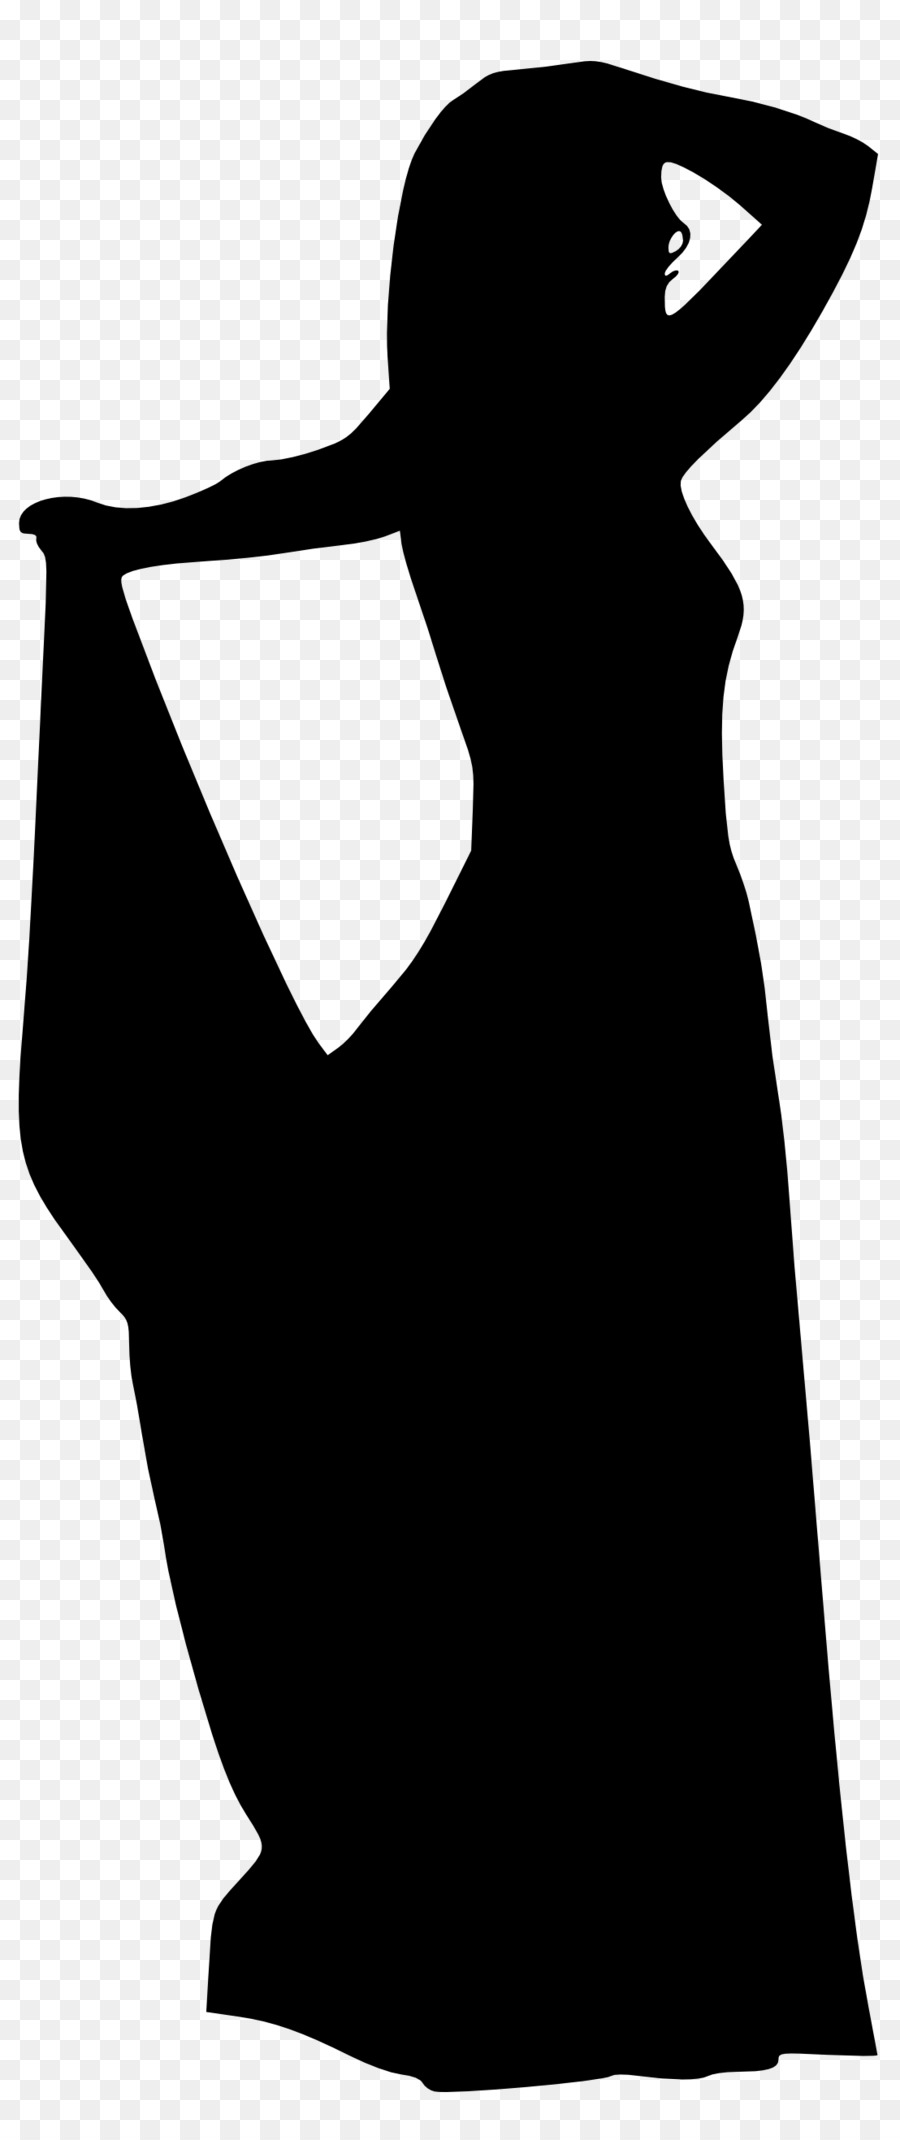 Silhouette Woman Monochrome photography - woman silhouette png download - 1108*2618 - Free Transparent Silhouette png Download.